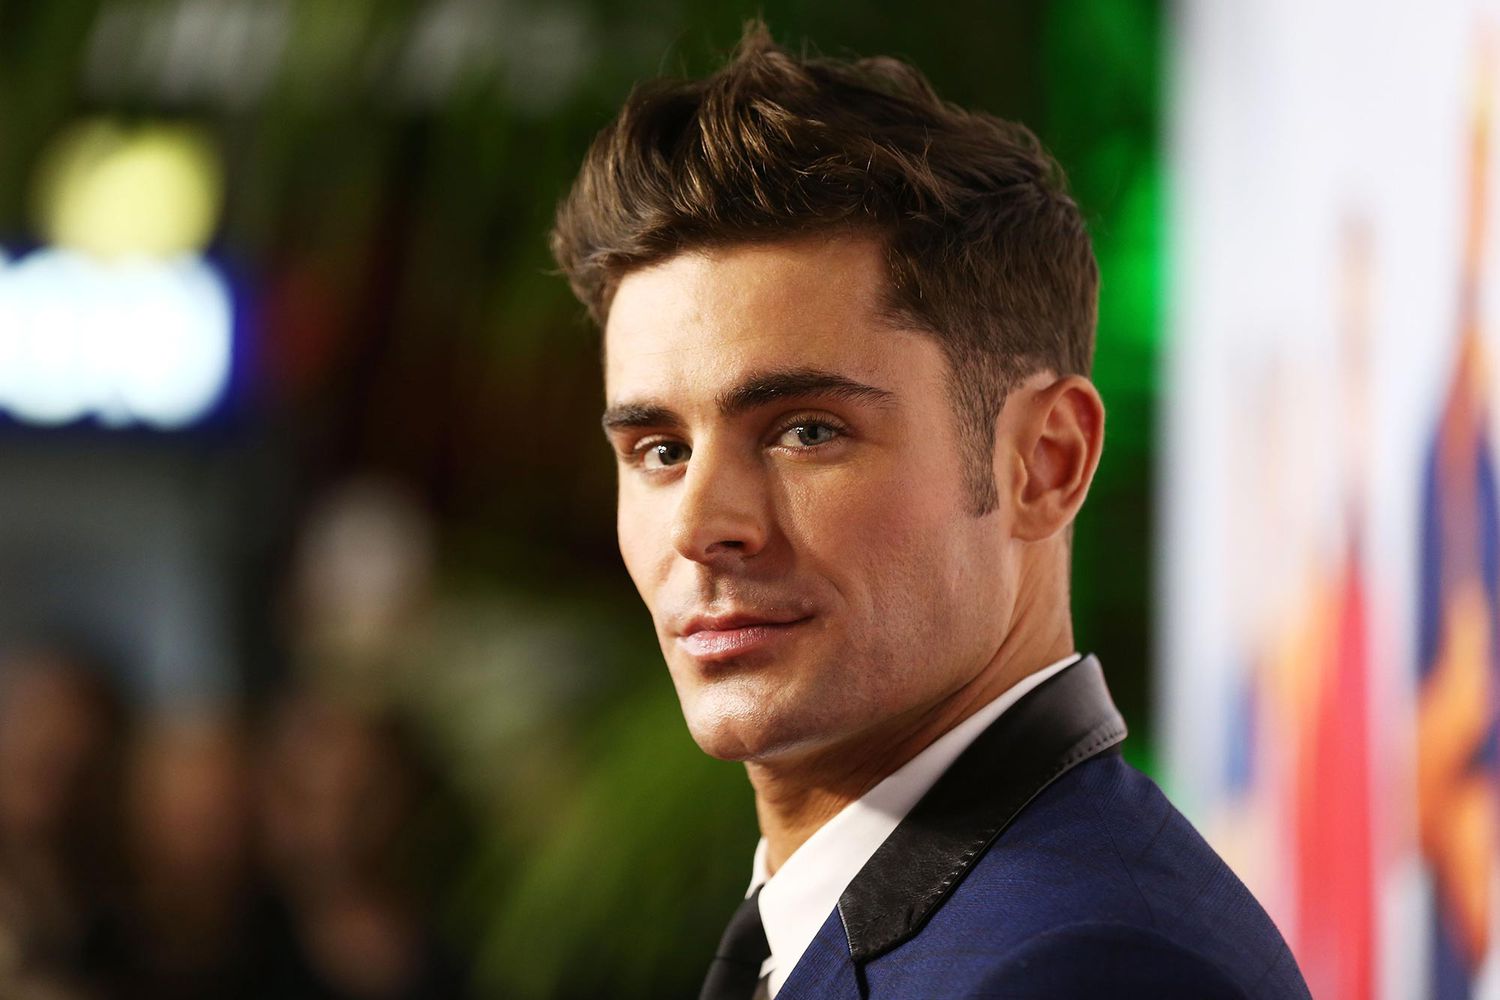 Zac Efron debunks plastic surgery rumors, explaining swollen jaw was from an accidental fall